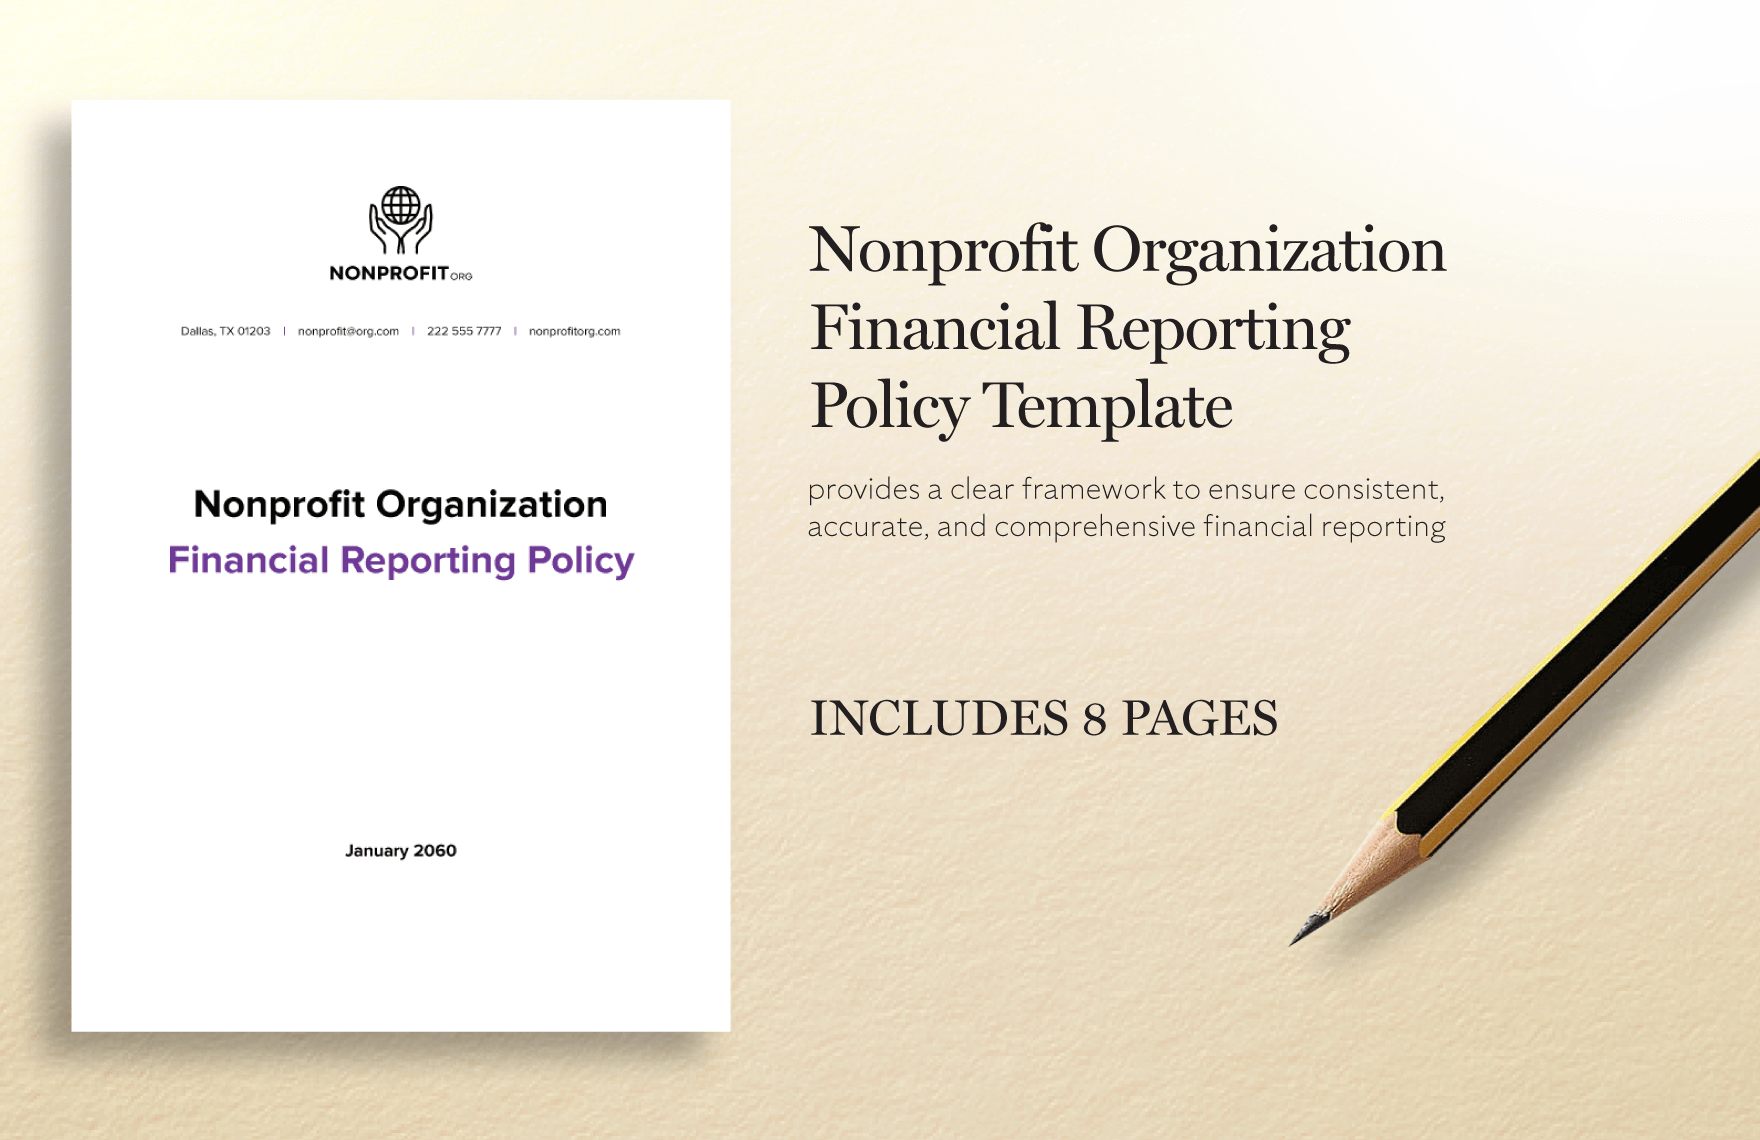 Nonprofit Organization Financial Reporting Policy Template